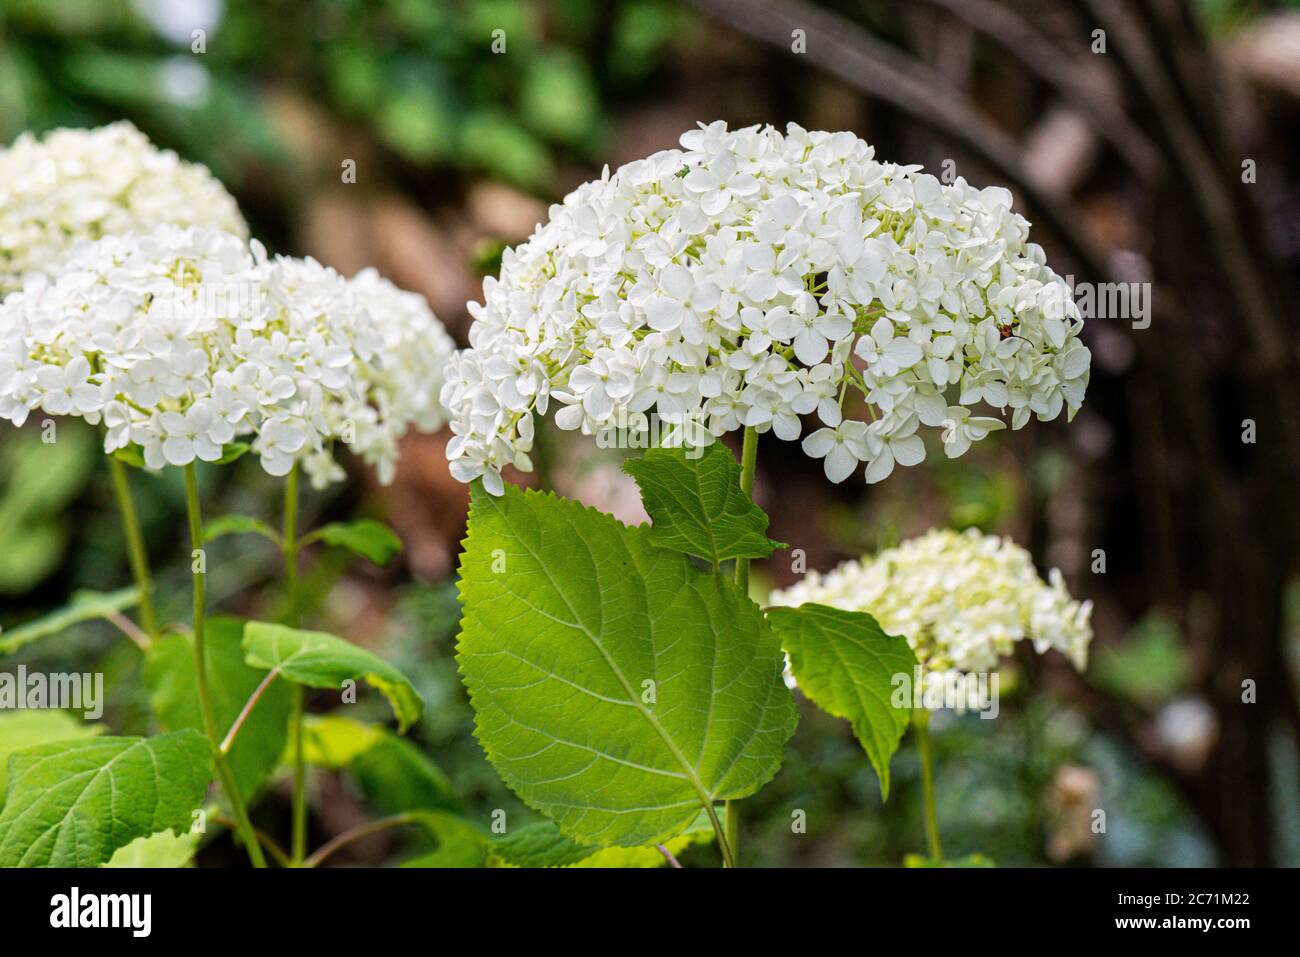 The flowers of a Hydrangea arborescens 'Annabelle' Stock Photo